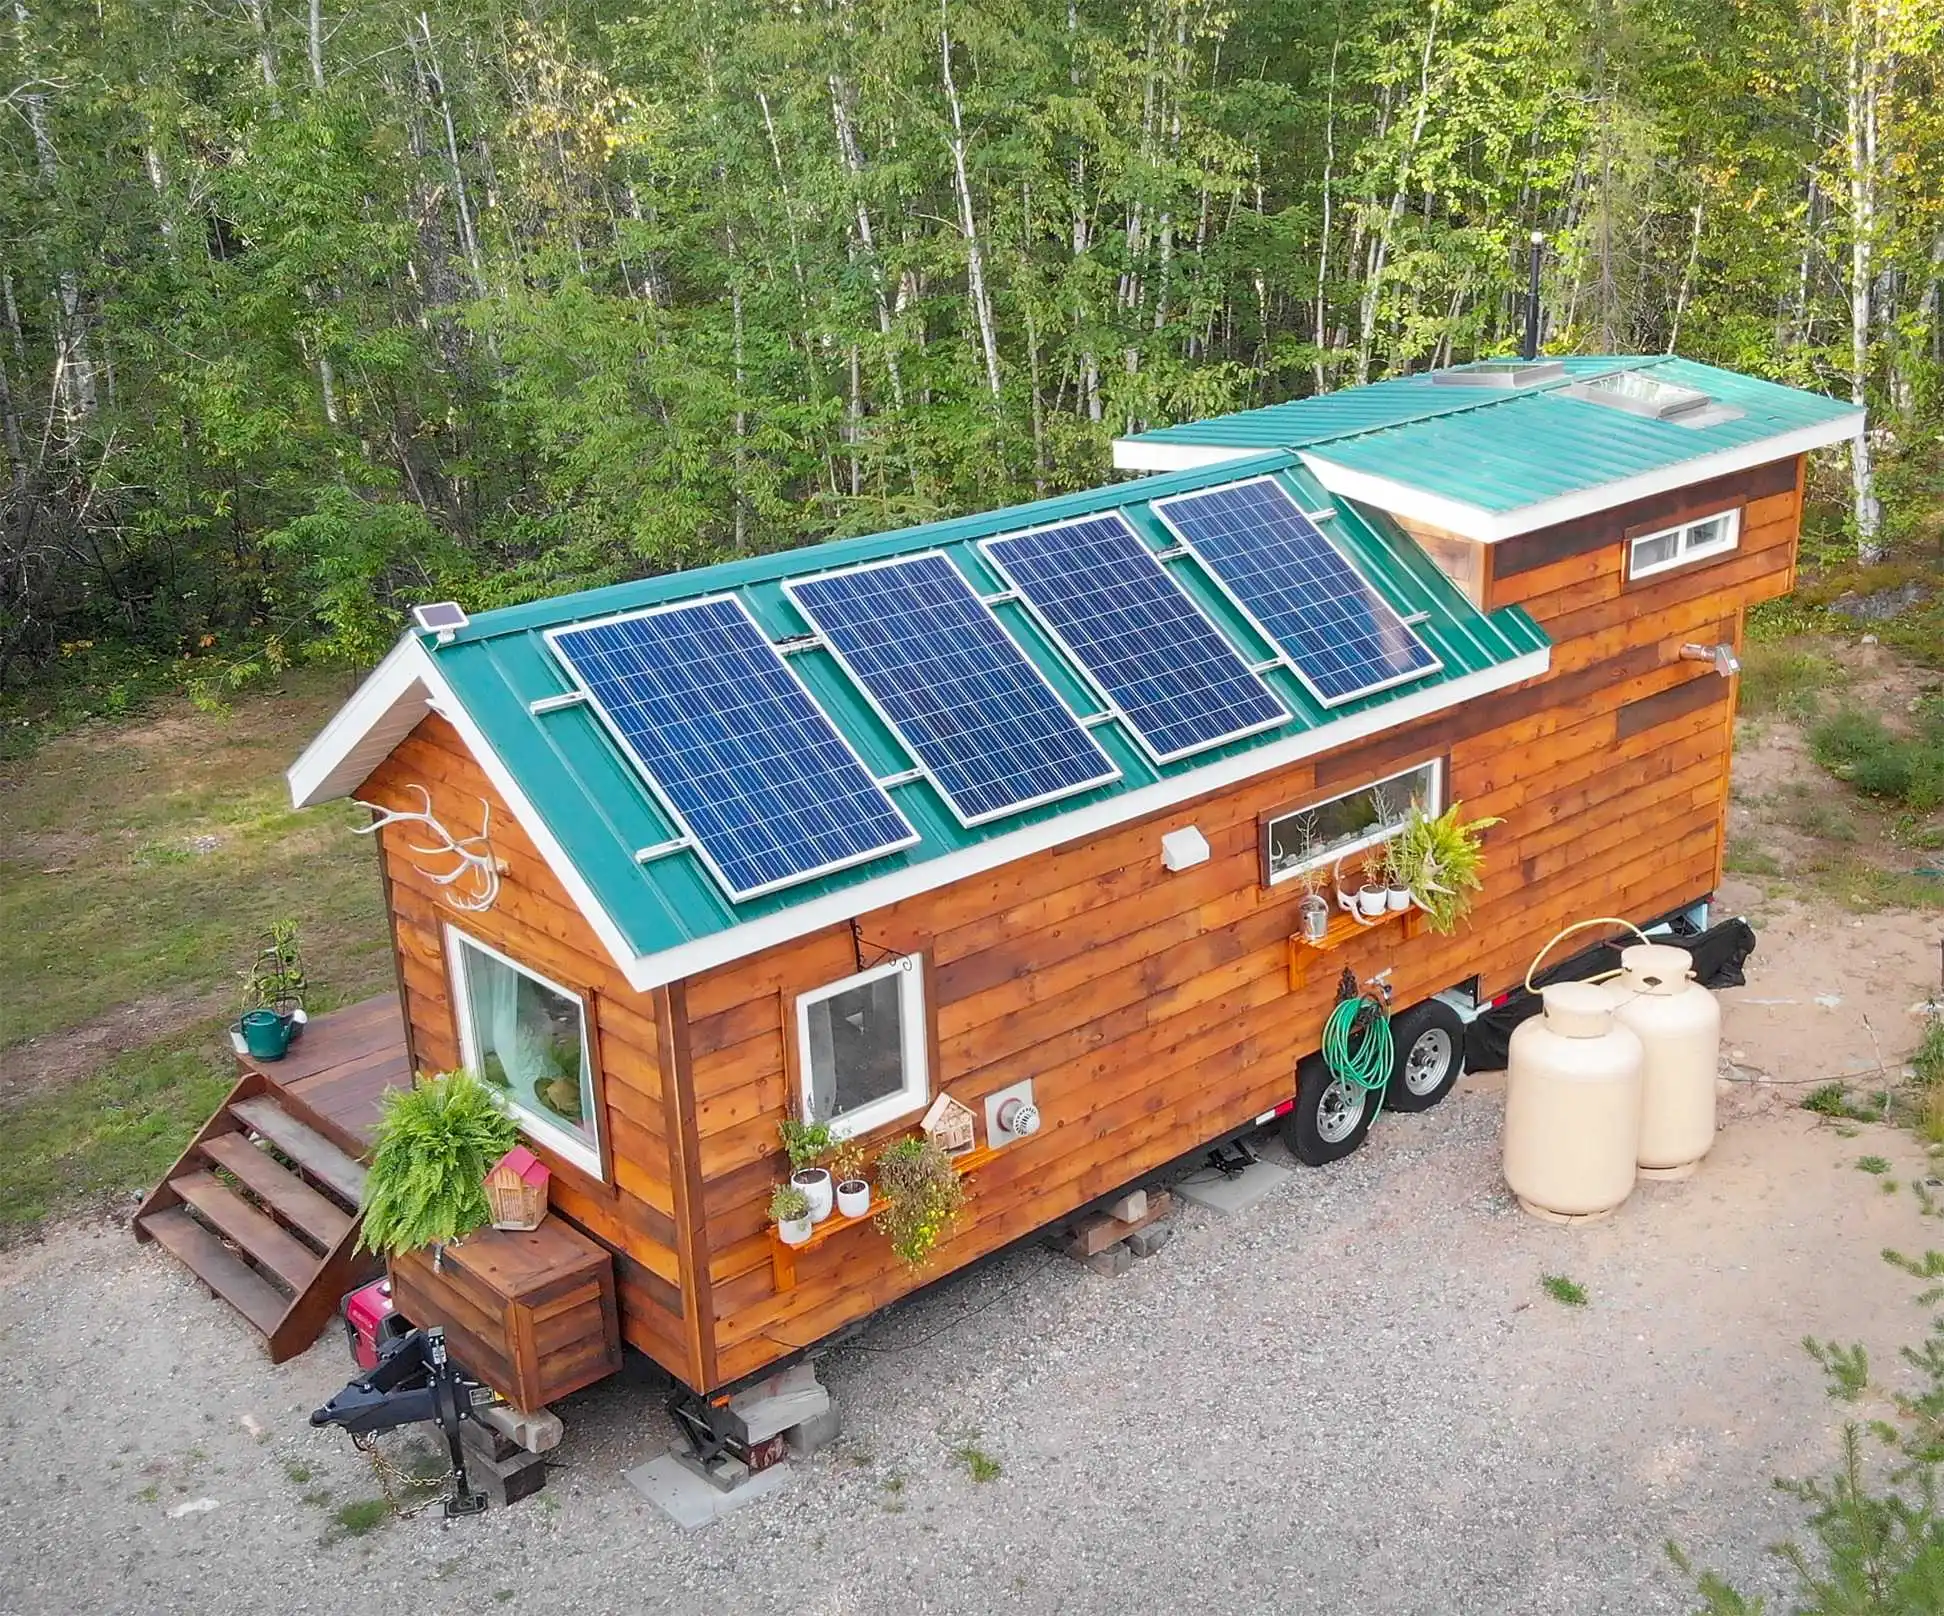 How Much Are Solar Panels for a Tiny House?